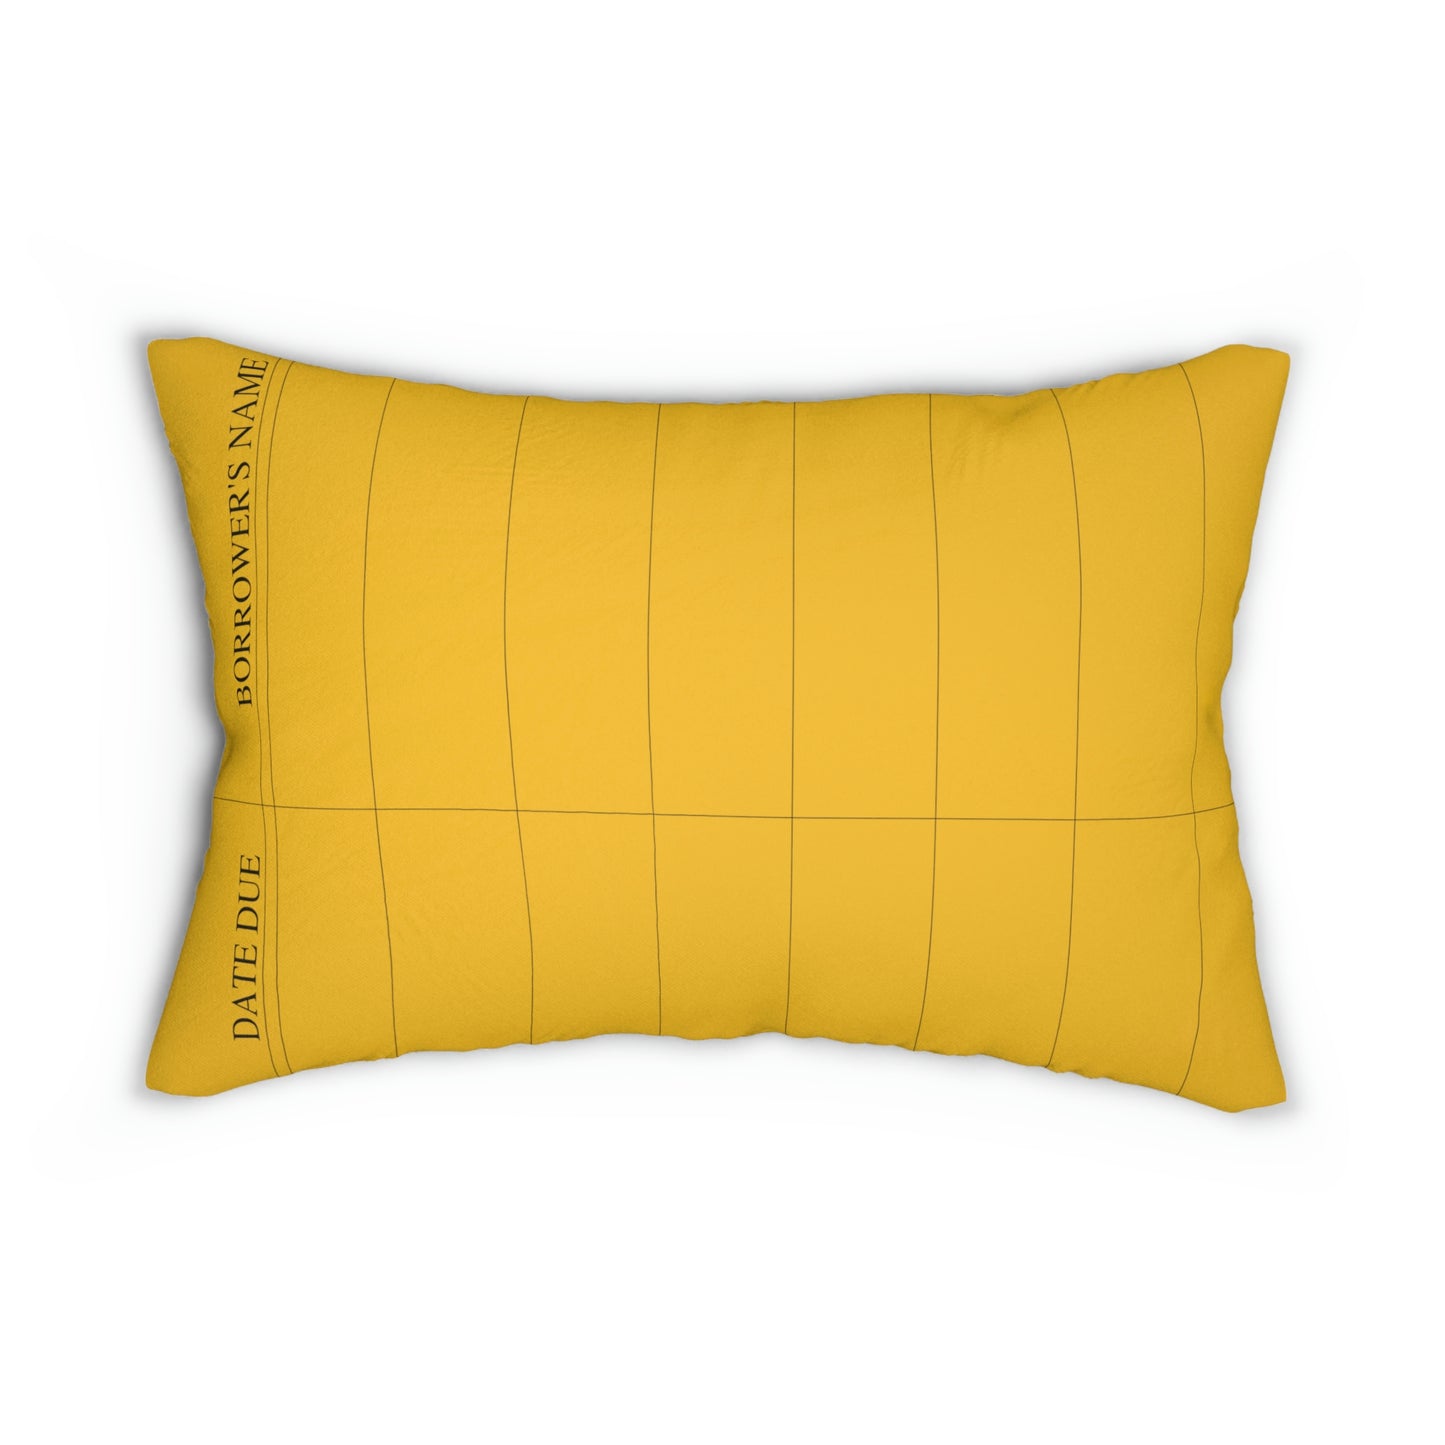 Library Card Pillows, Reading, Book Lover, Yellow